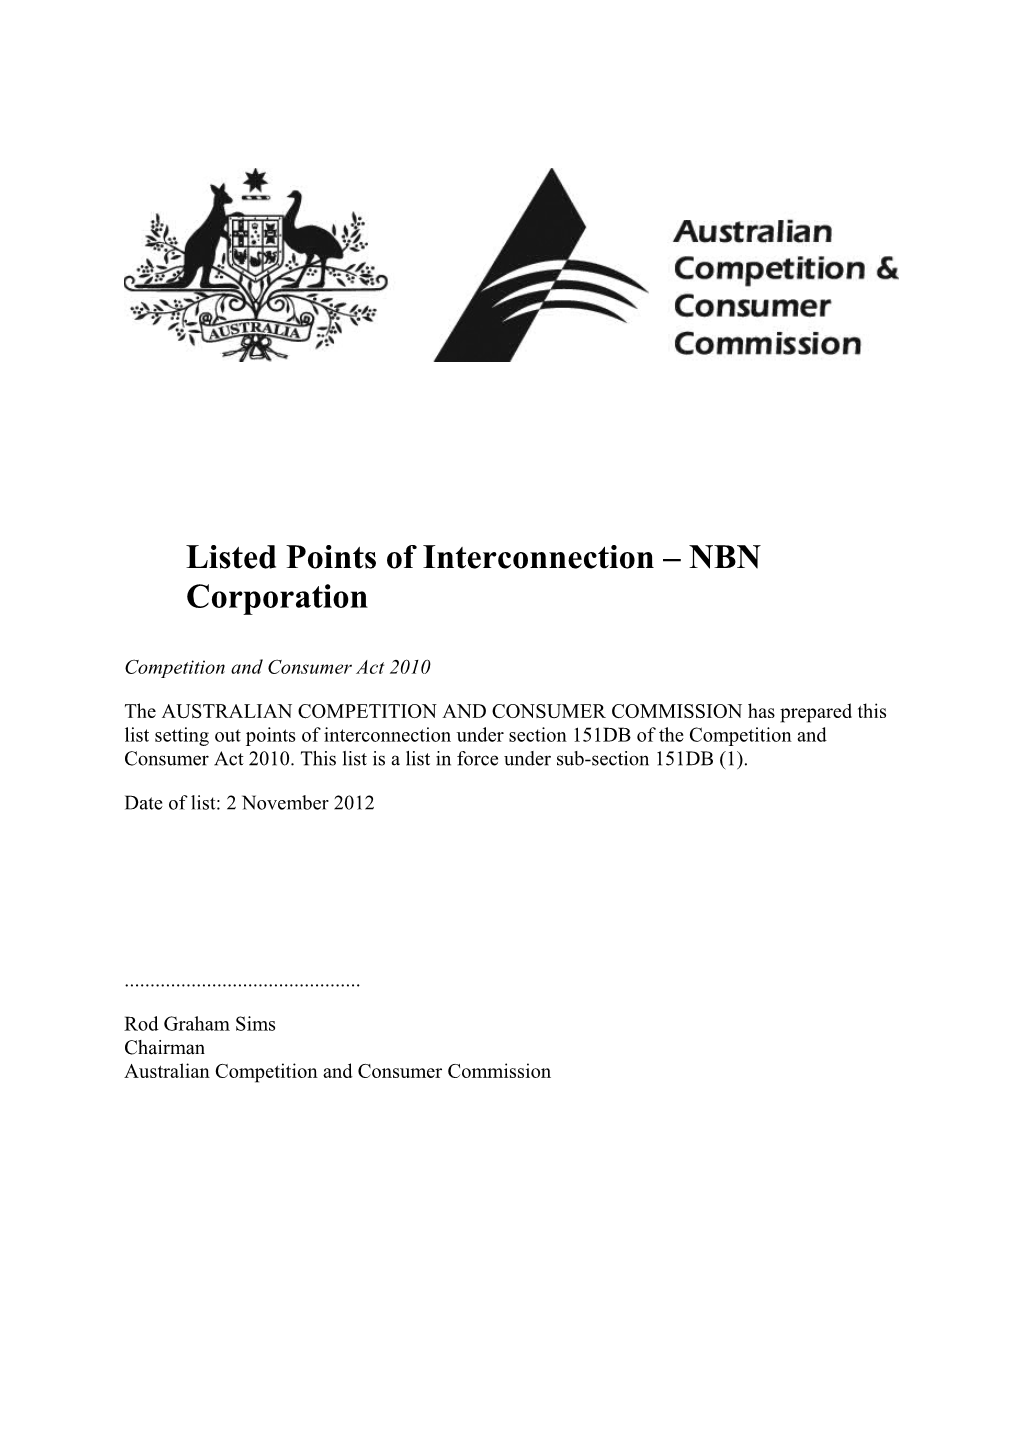 Listed Points of Interconnection NBN Corporation